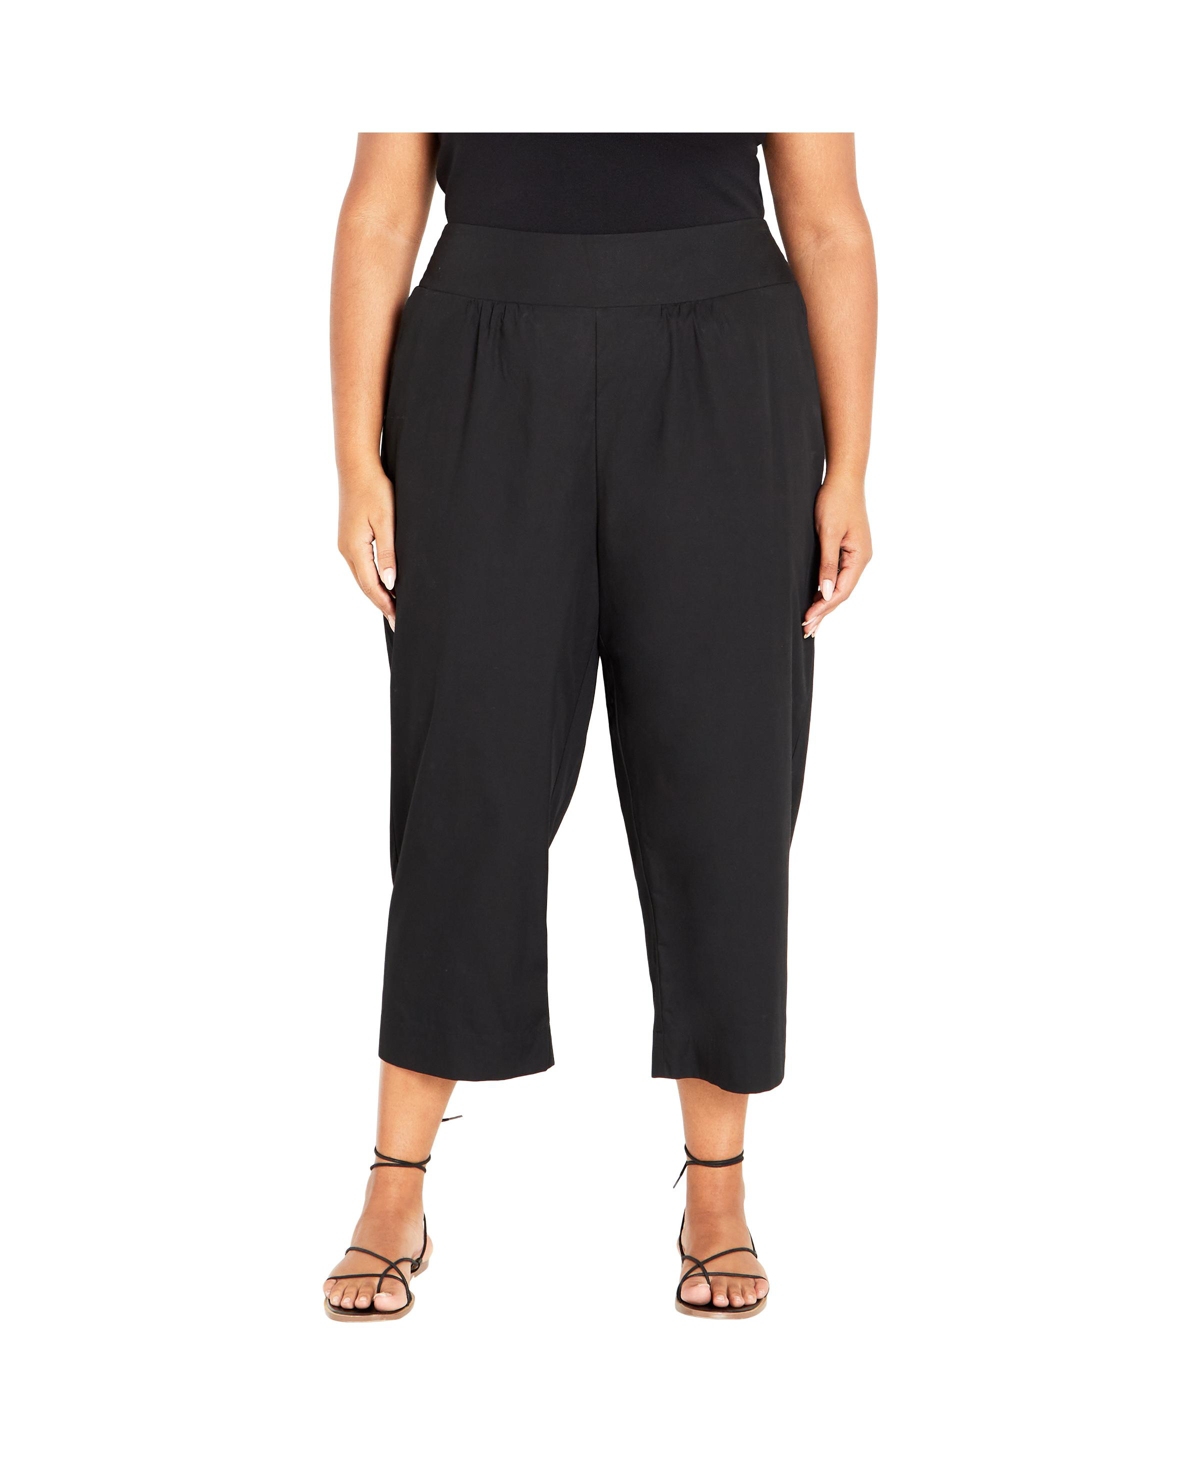 Plus Size Justice High Waist Pant - French navy